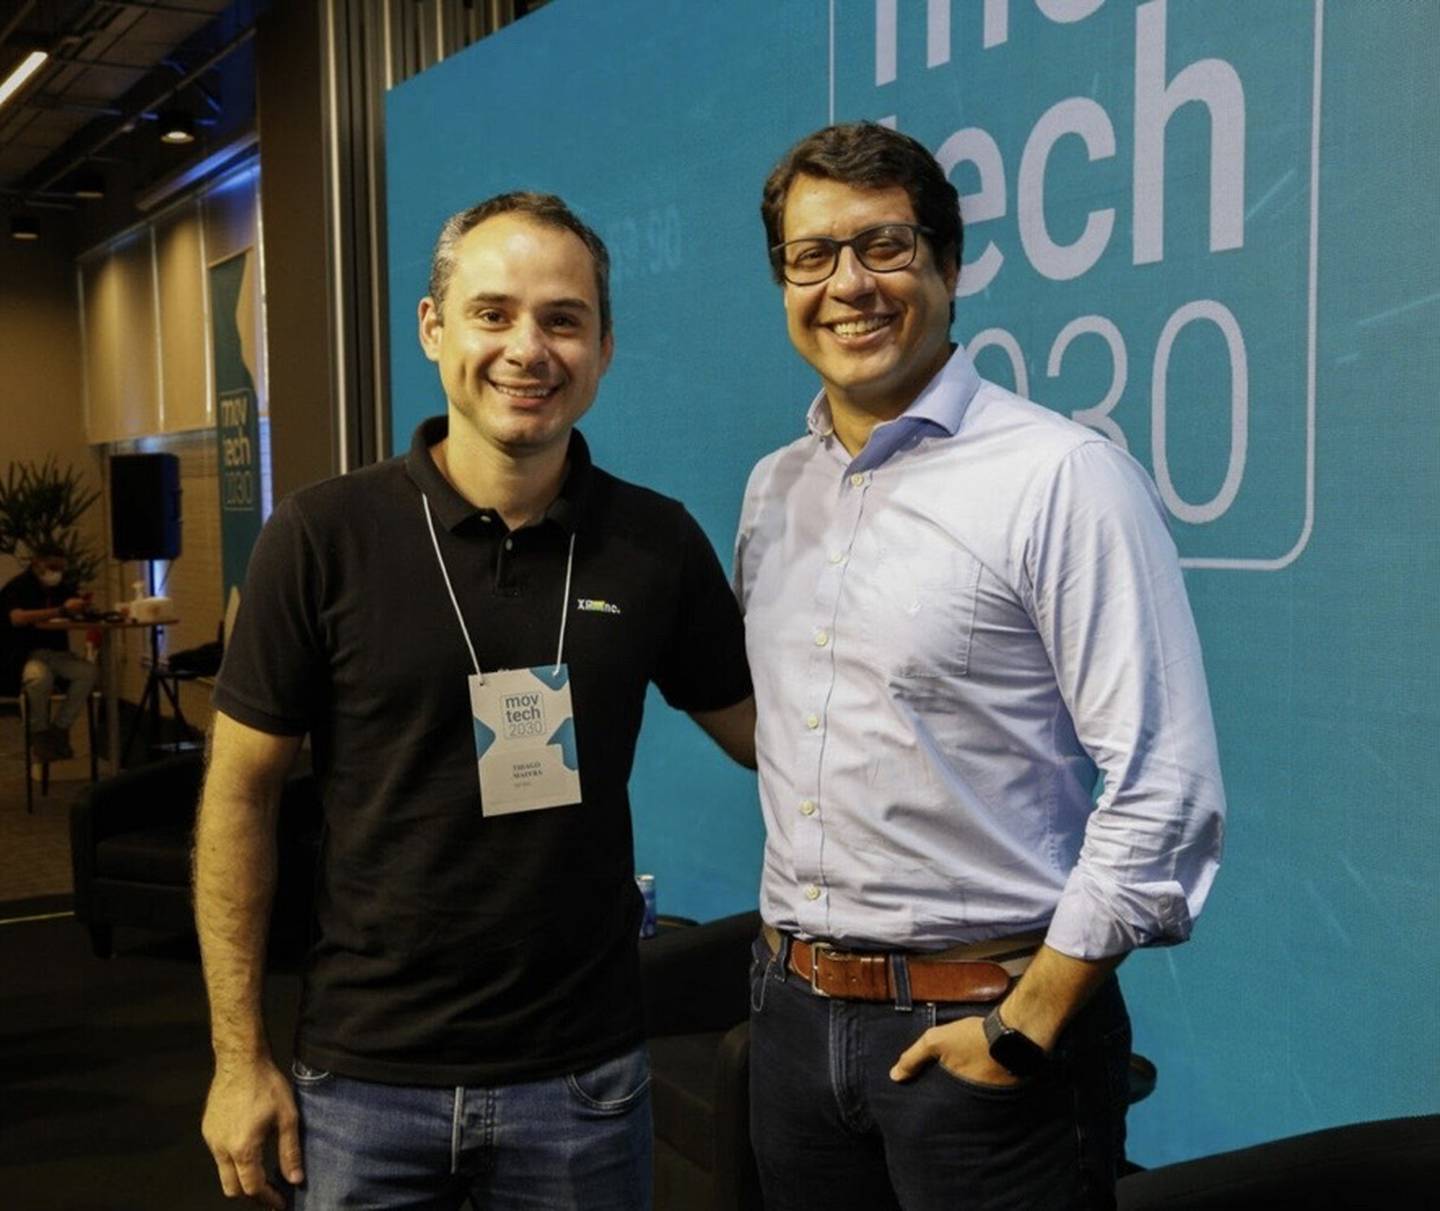 XP's CEO Thiago Maffra, and the CEO of iFood, Fabrício Bloisi.